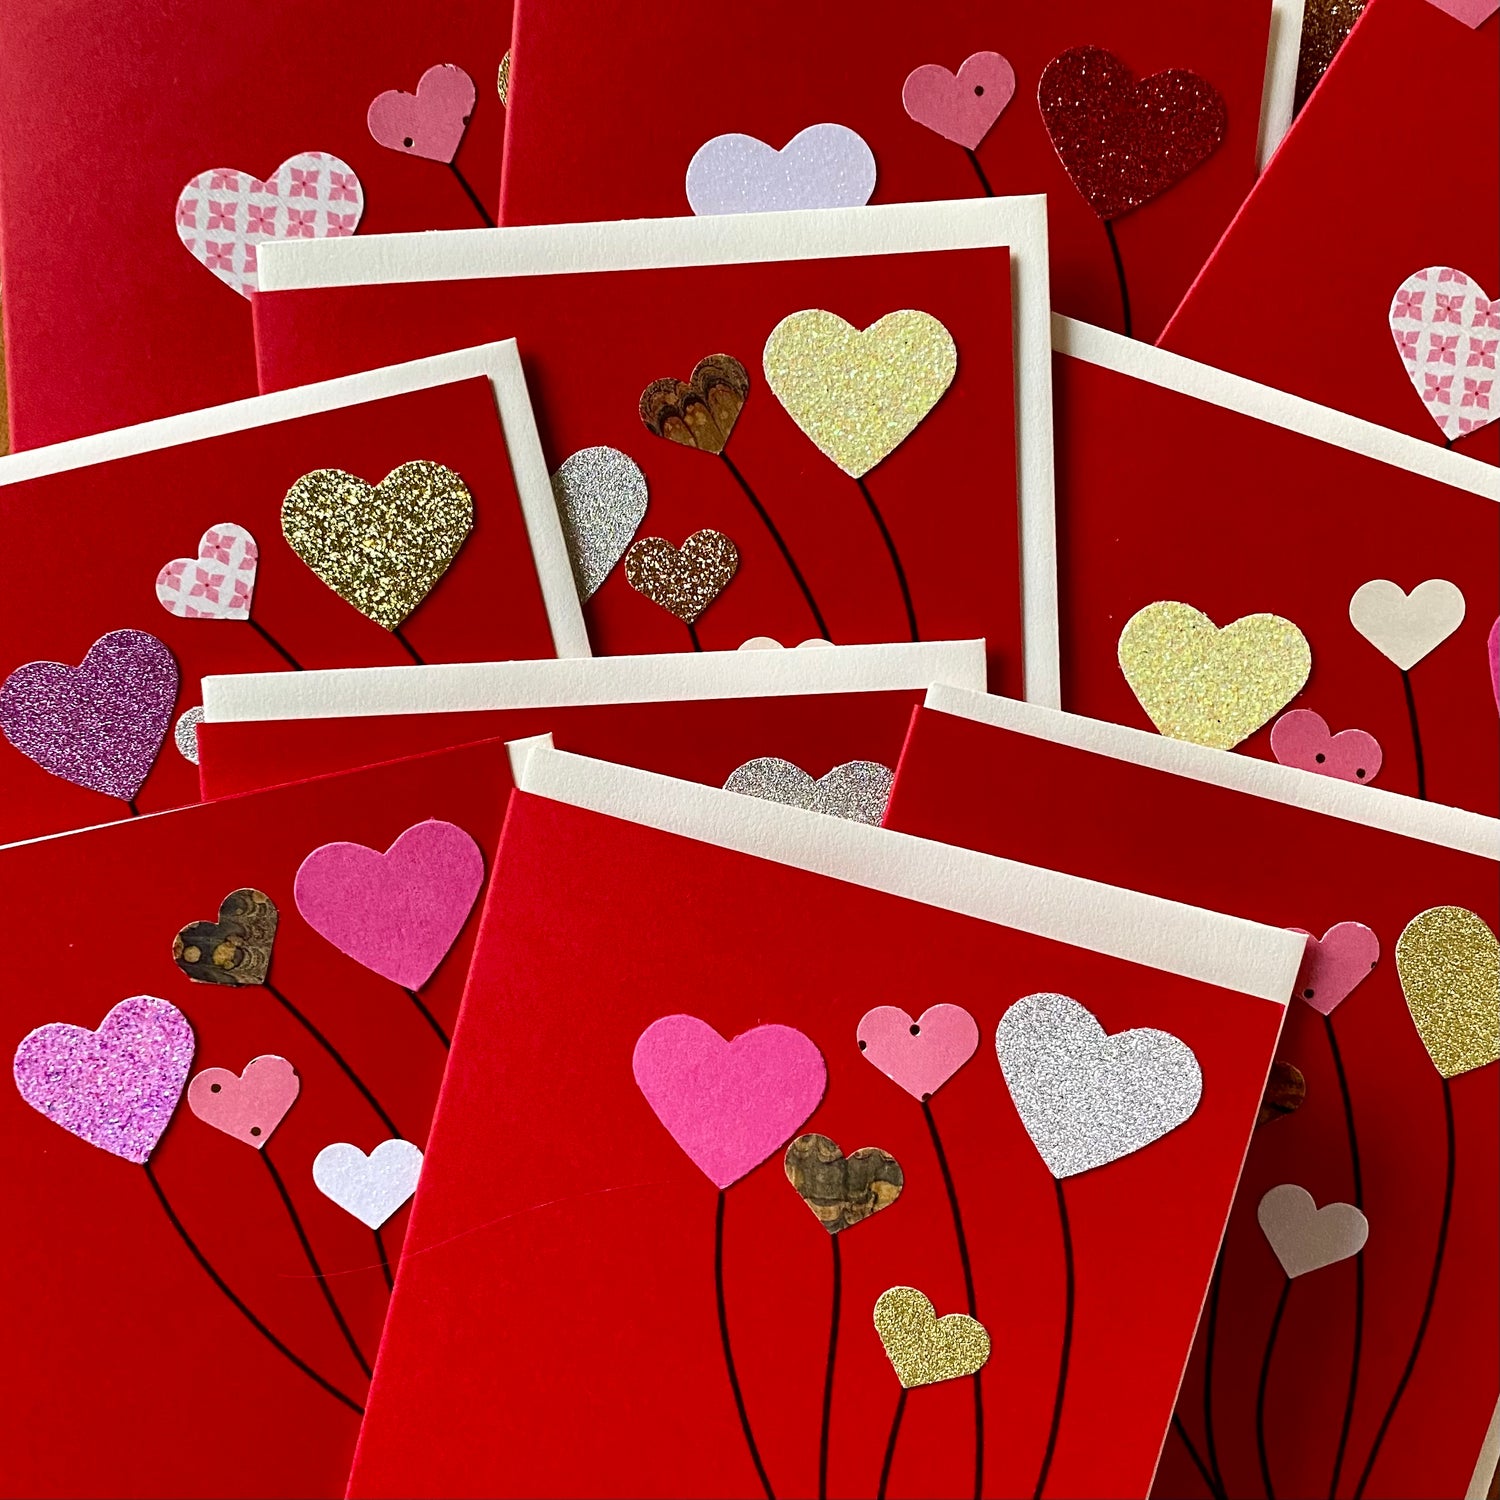 Collection of red Valentine cards, each with hearts in different colors and sizes arranged like balloons